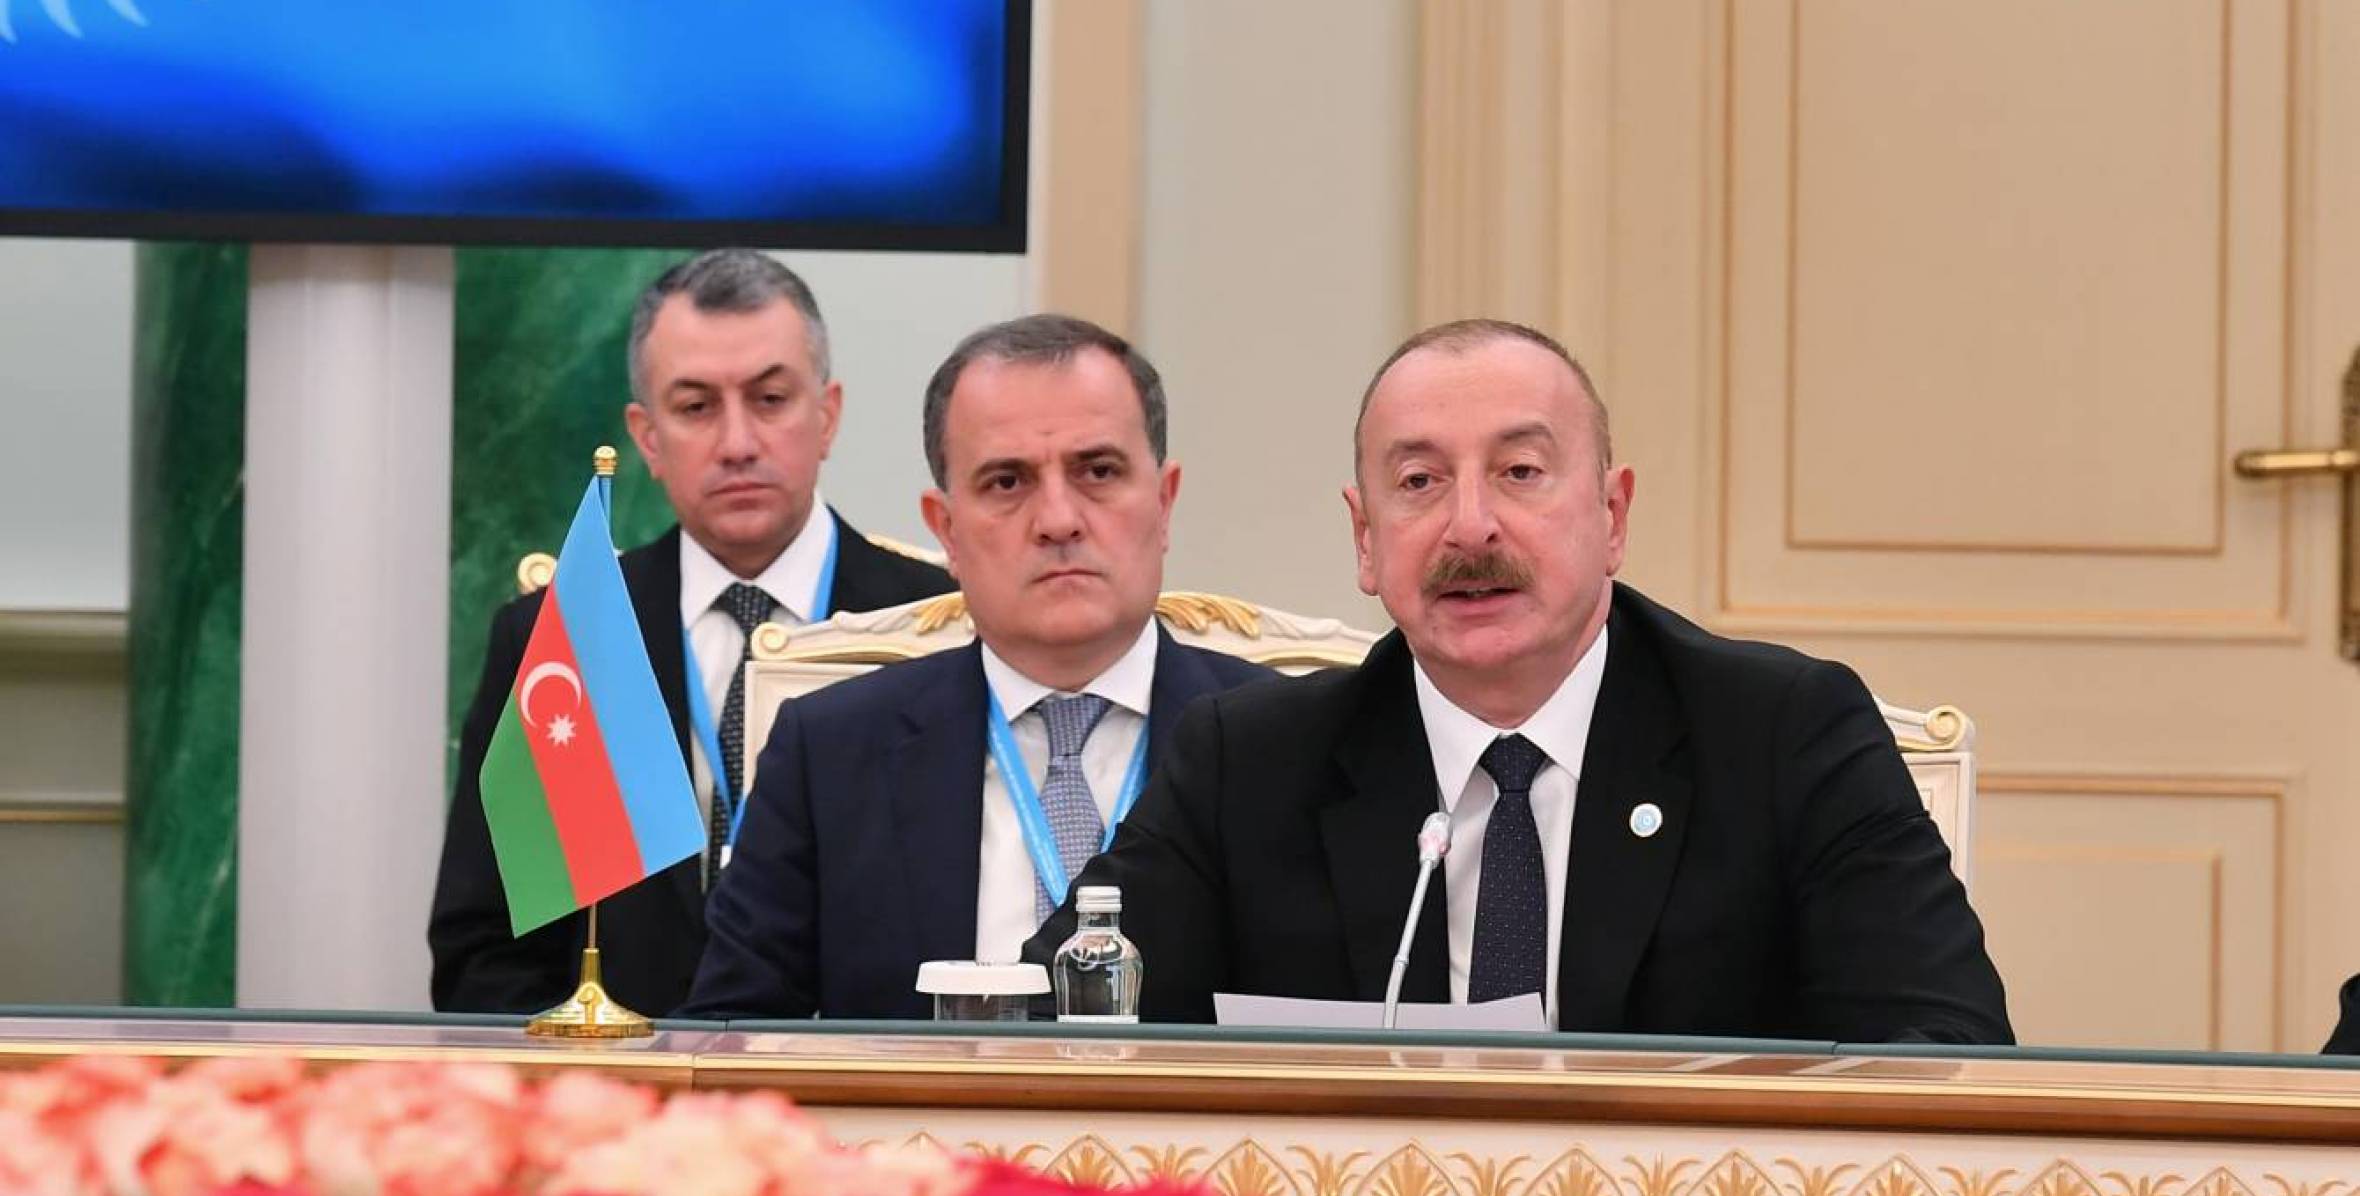 Speech by Ilham Aliyev at the 10th summit of the Organization of Turkic States in Astana